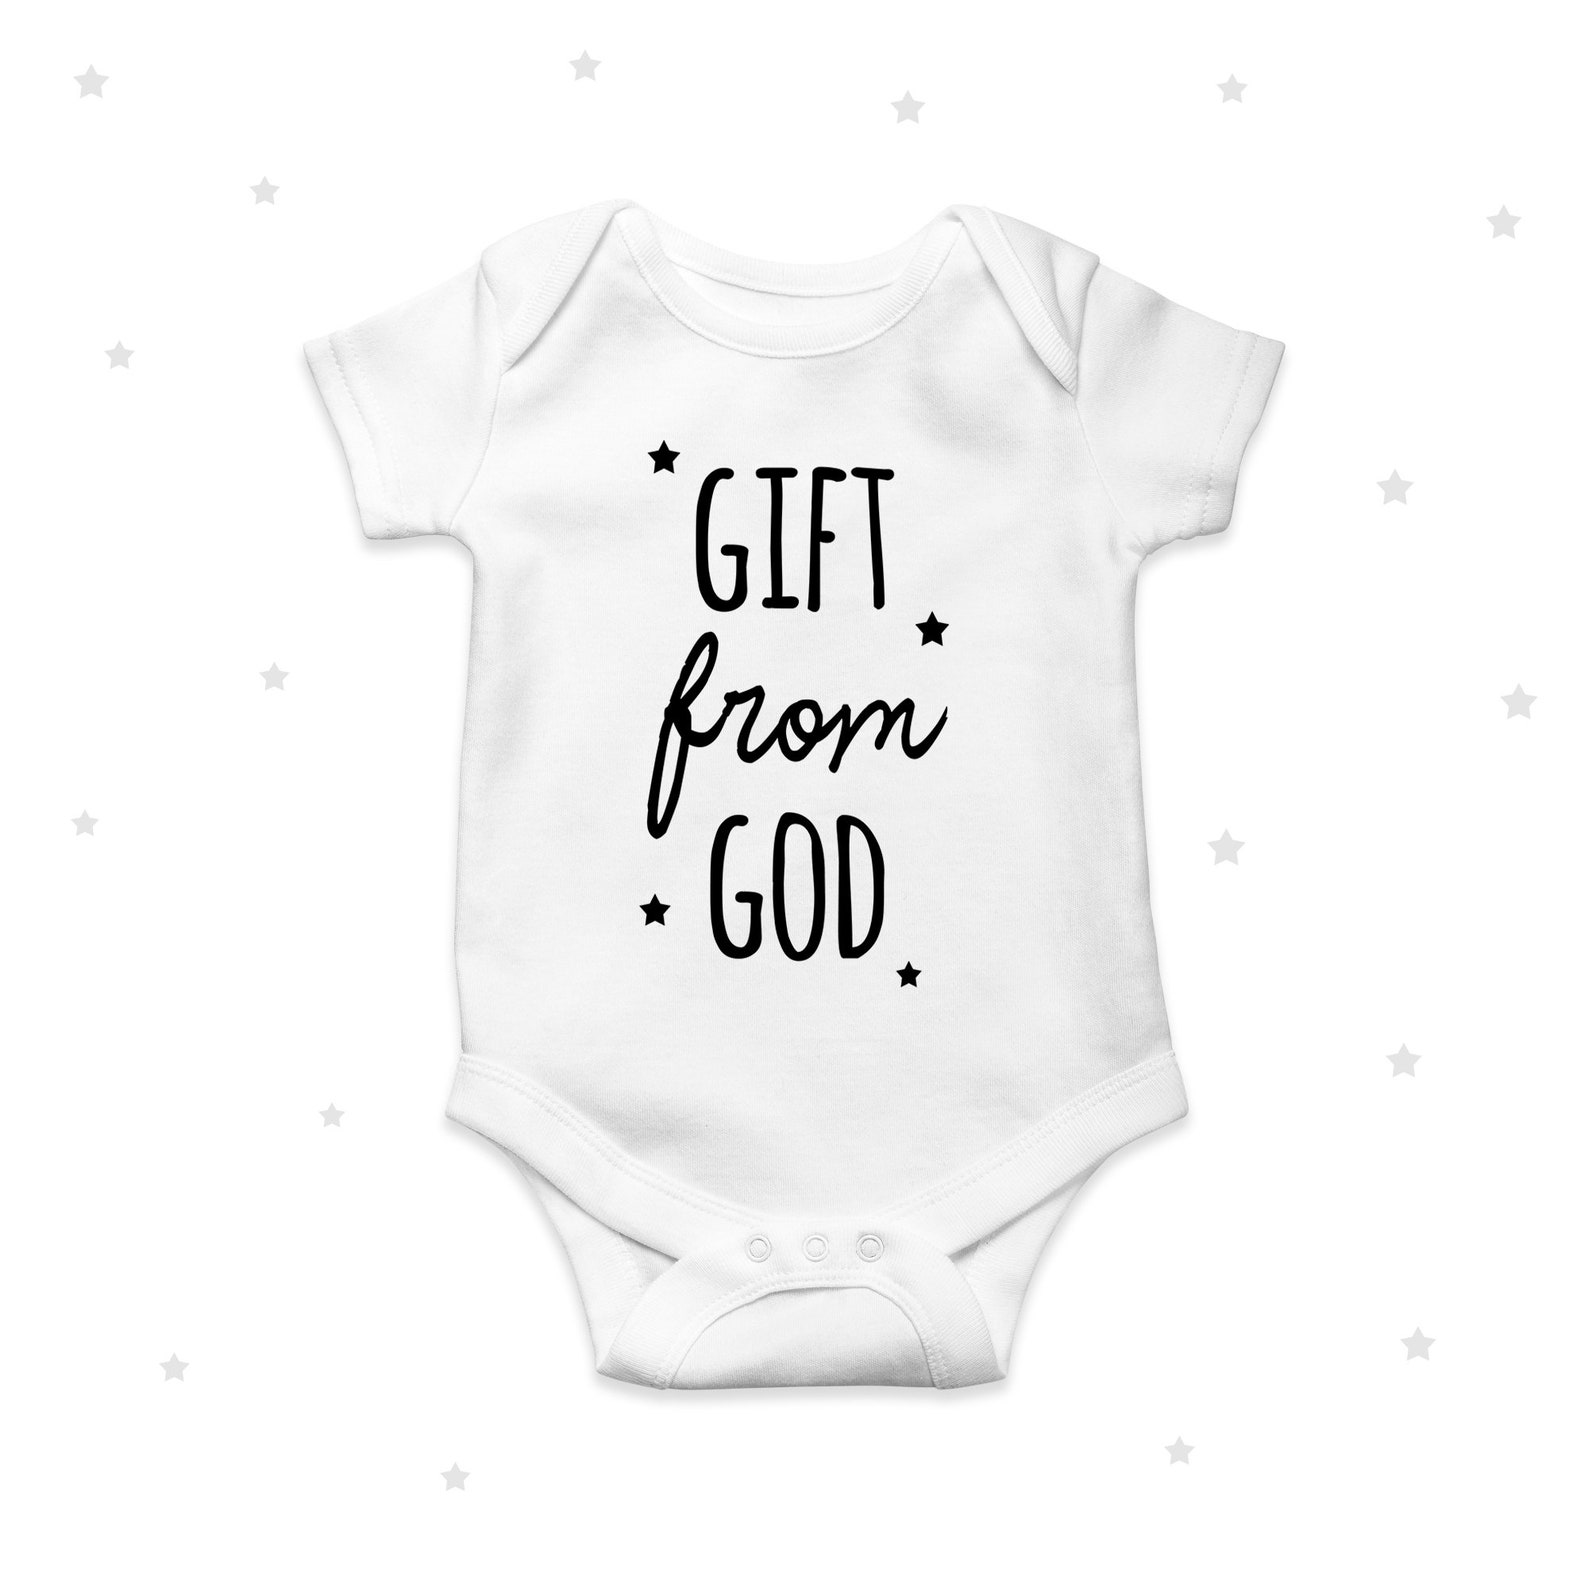 Gift from God Cute baby grow religion baptism coming home baby | Etsy